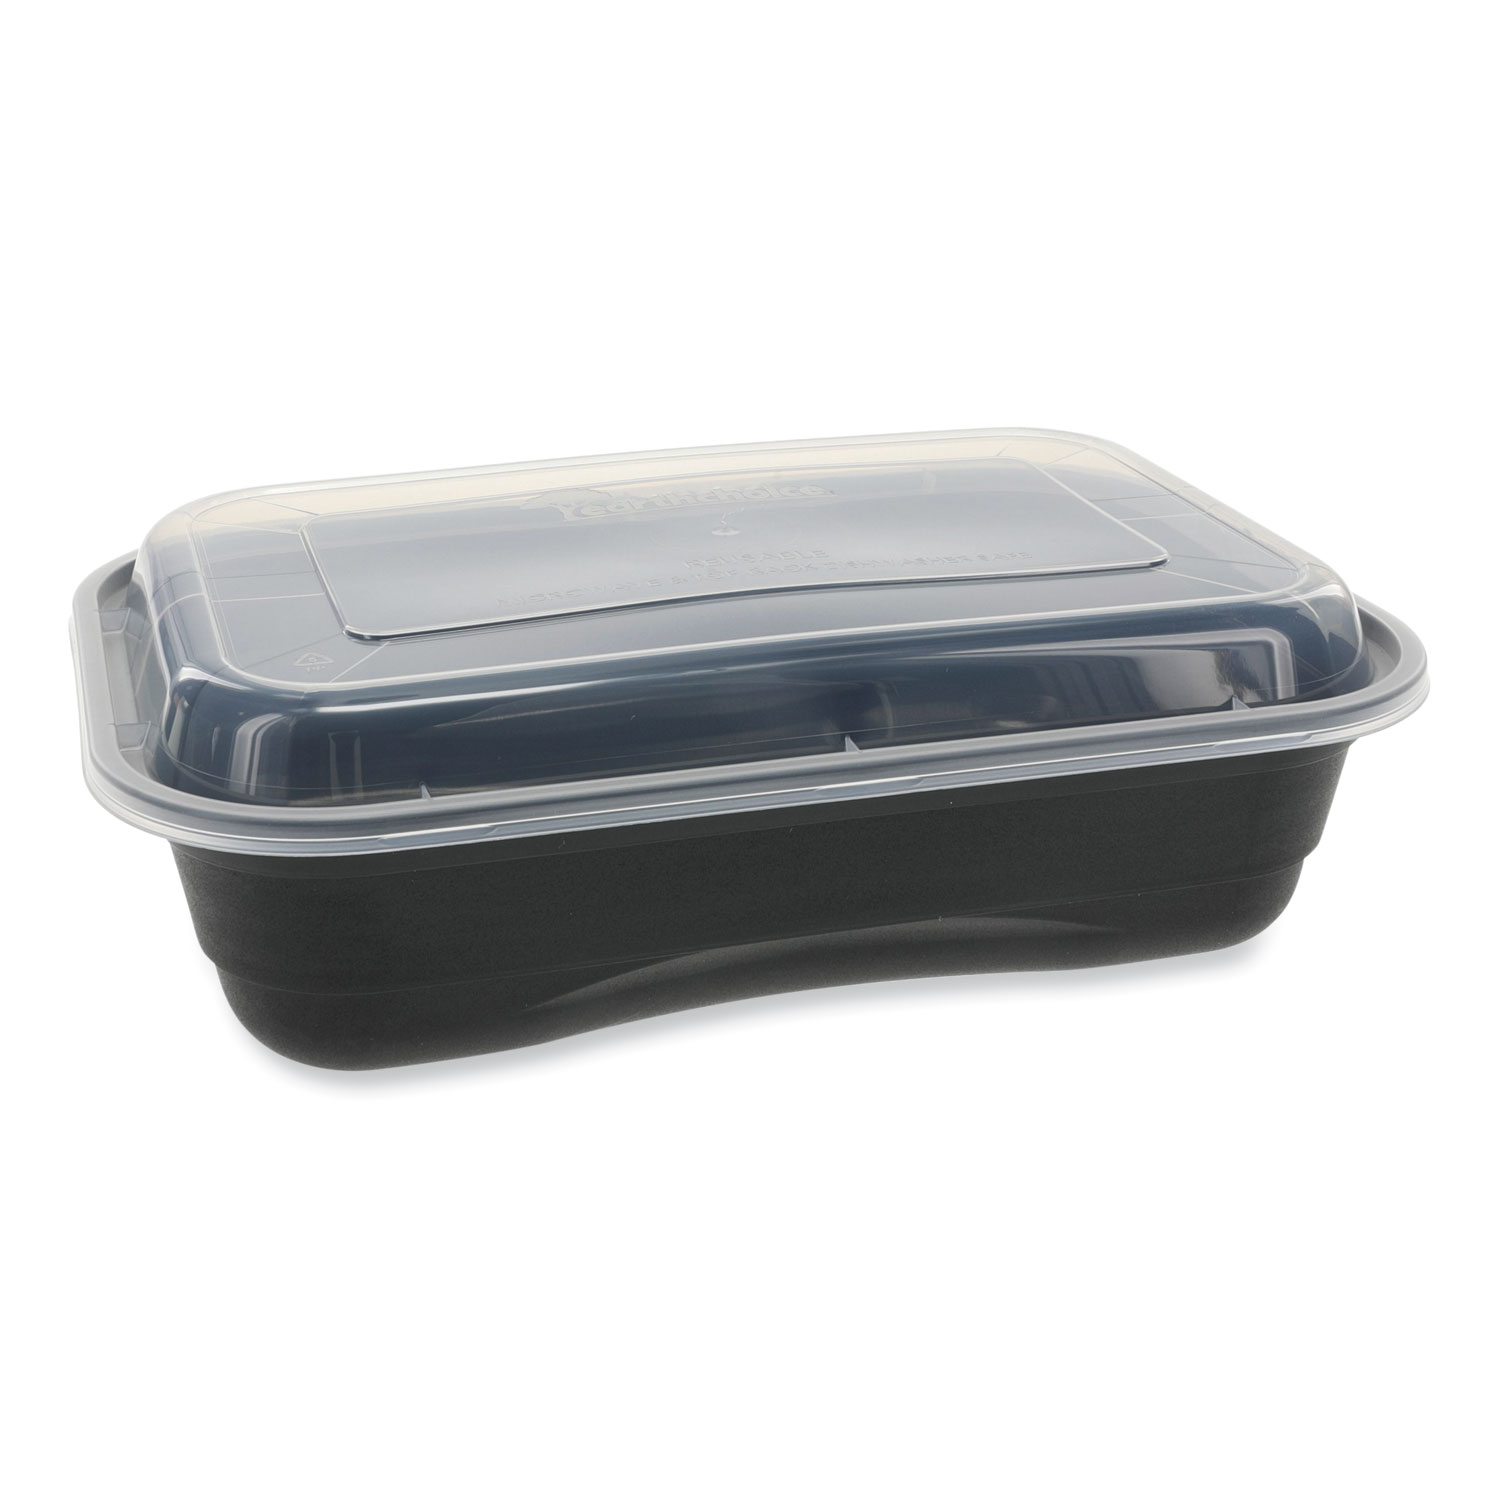 Newspring Rectangular Container with Lid, Black, 58 oz - 150 pack